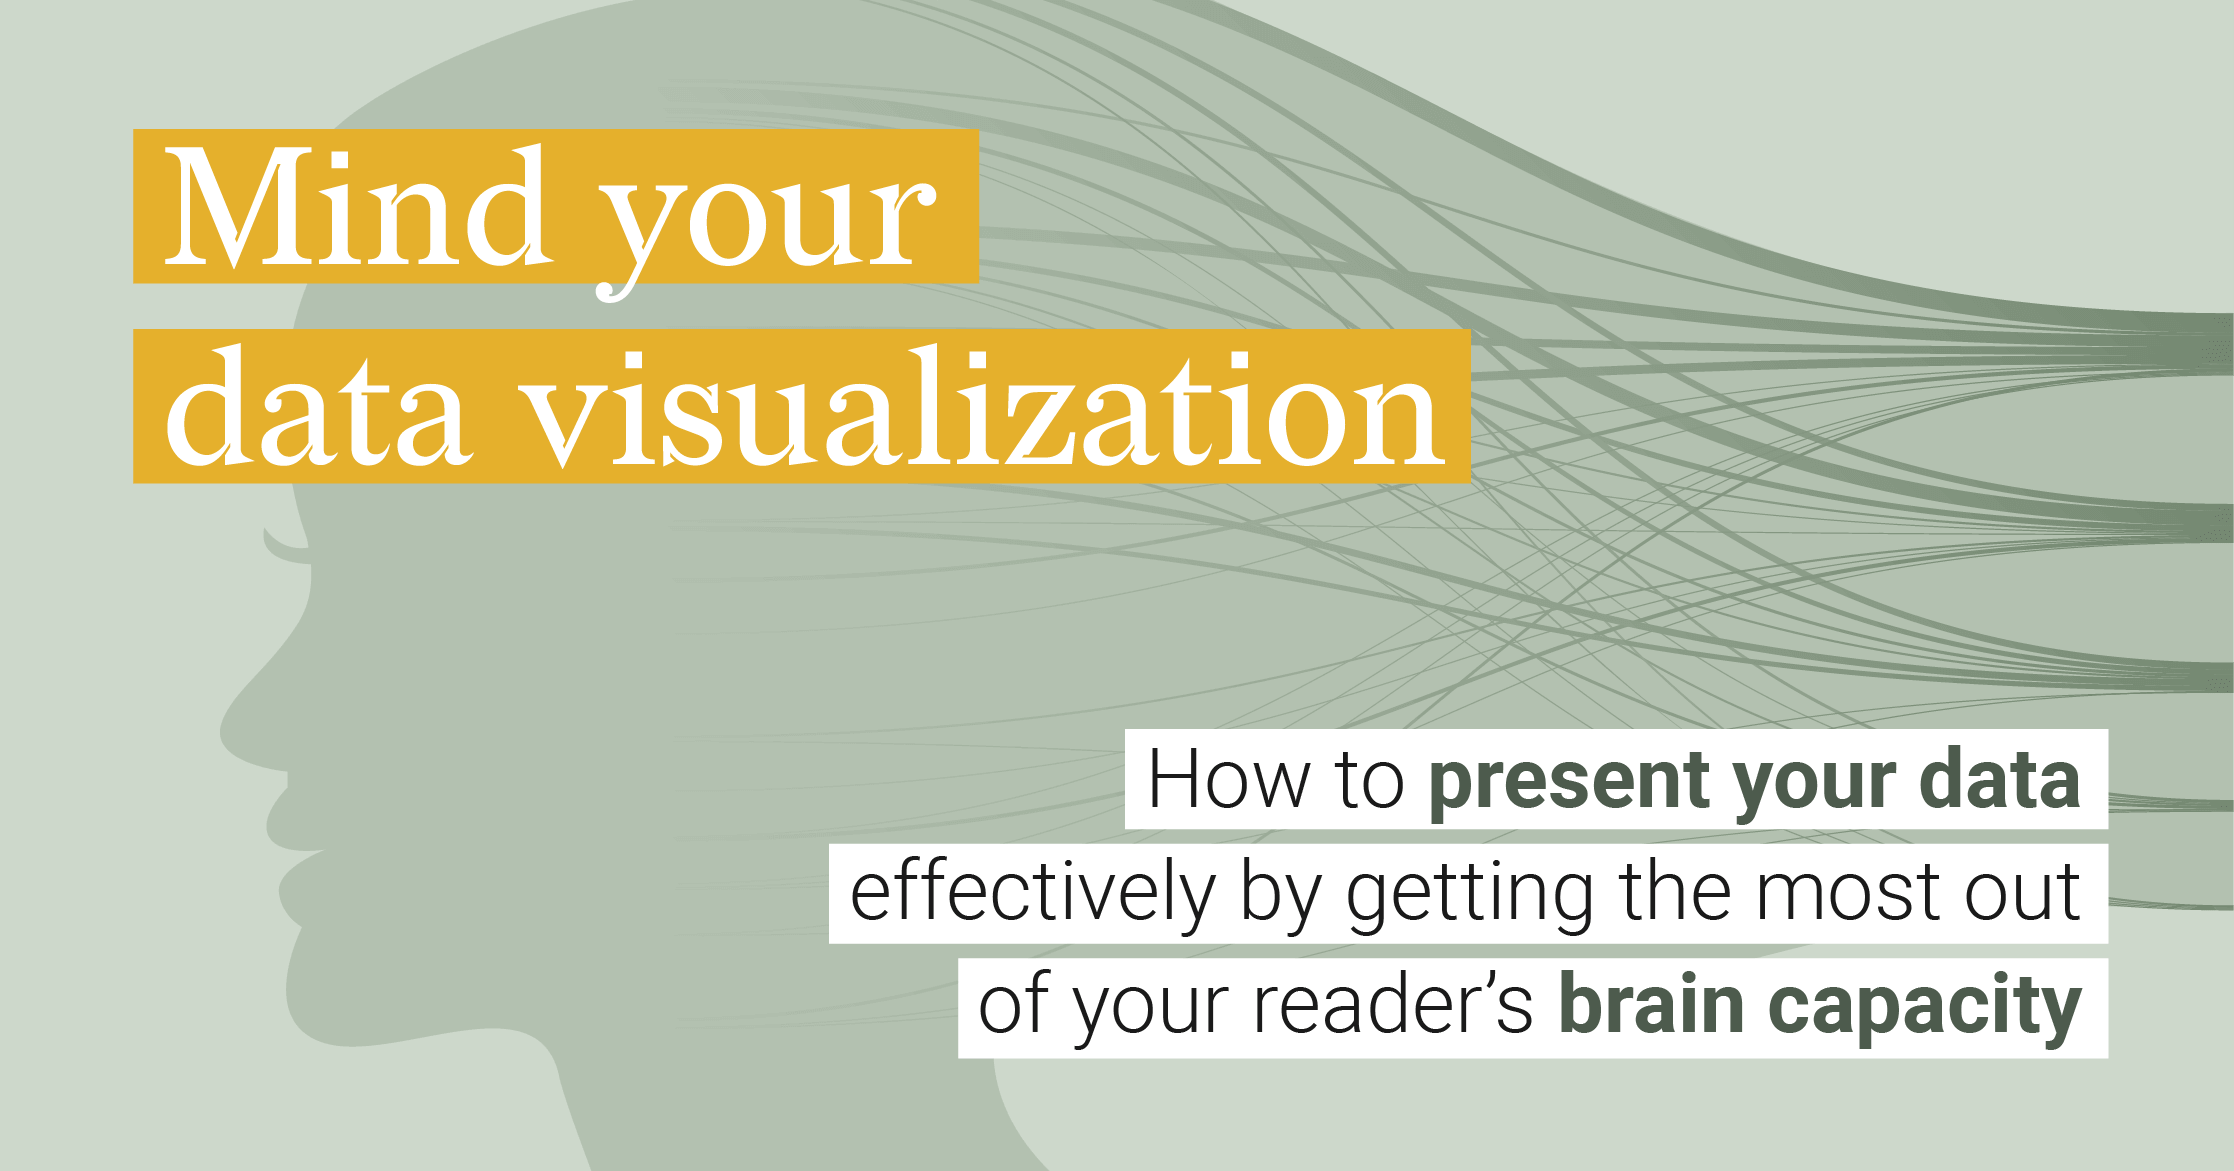 Mind your data visualization: How to present your data effectively by getting the most out of your reader's brain capacity